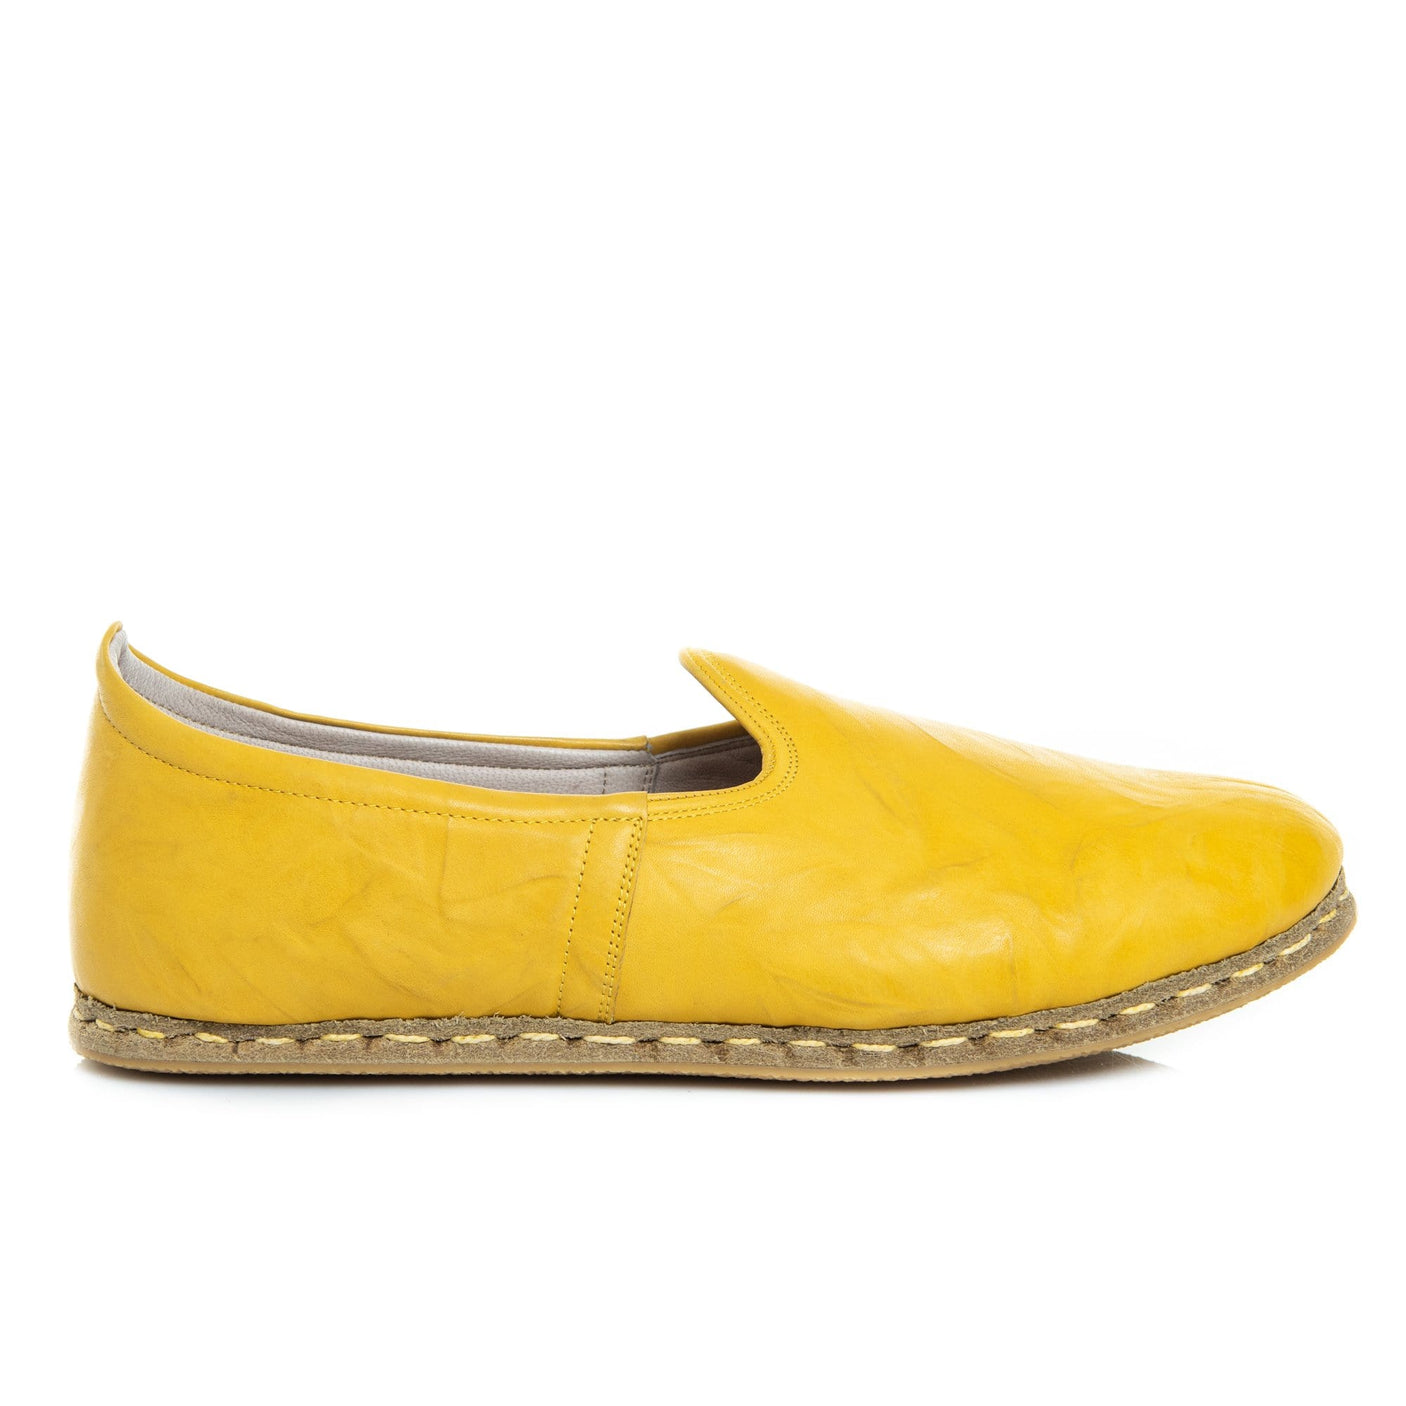 Men's Leather Yellow Cab Slip On Shoes